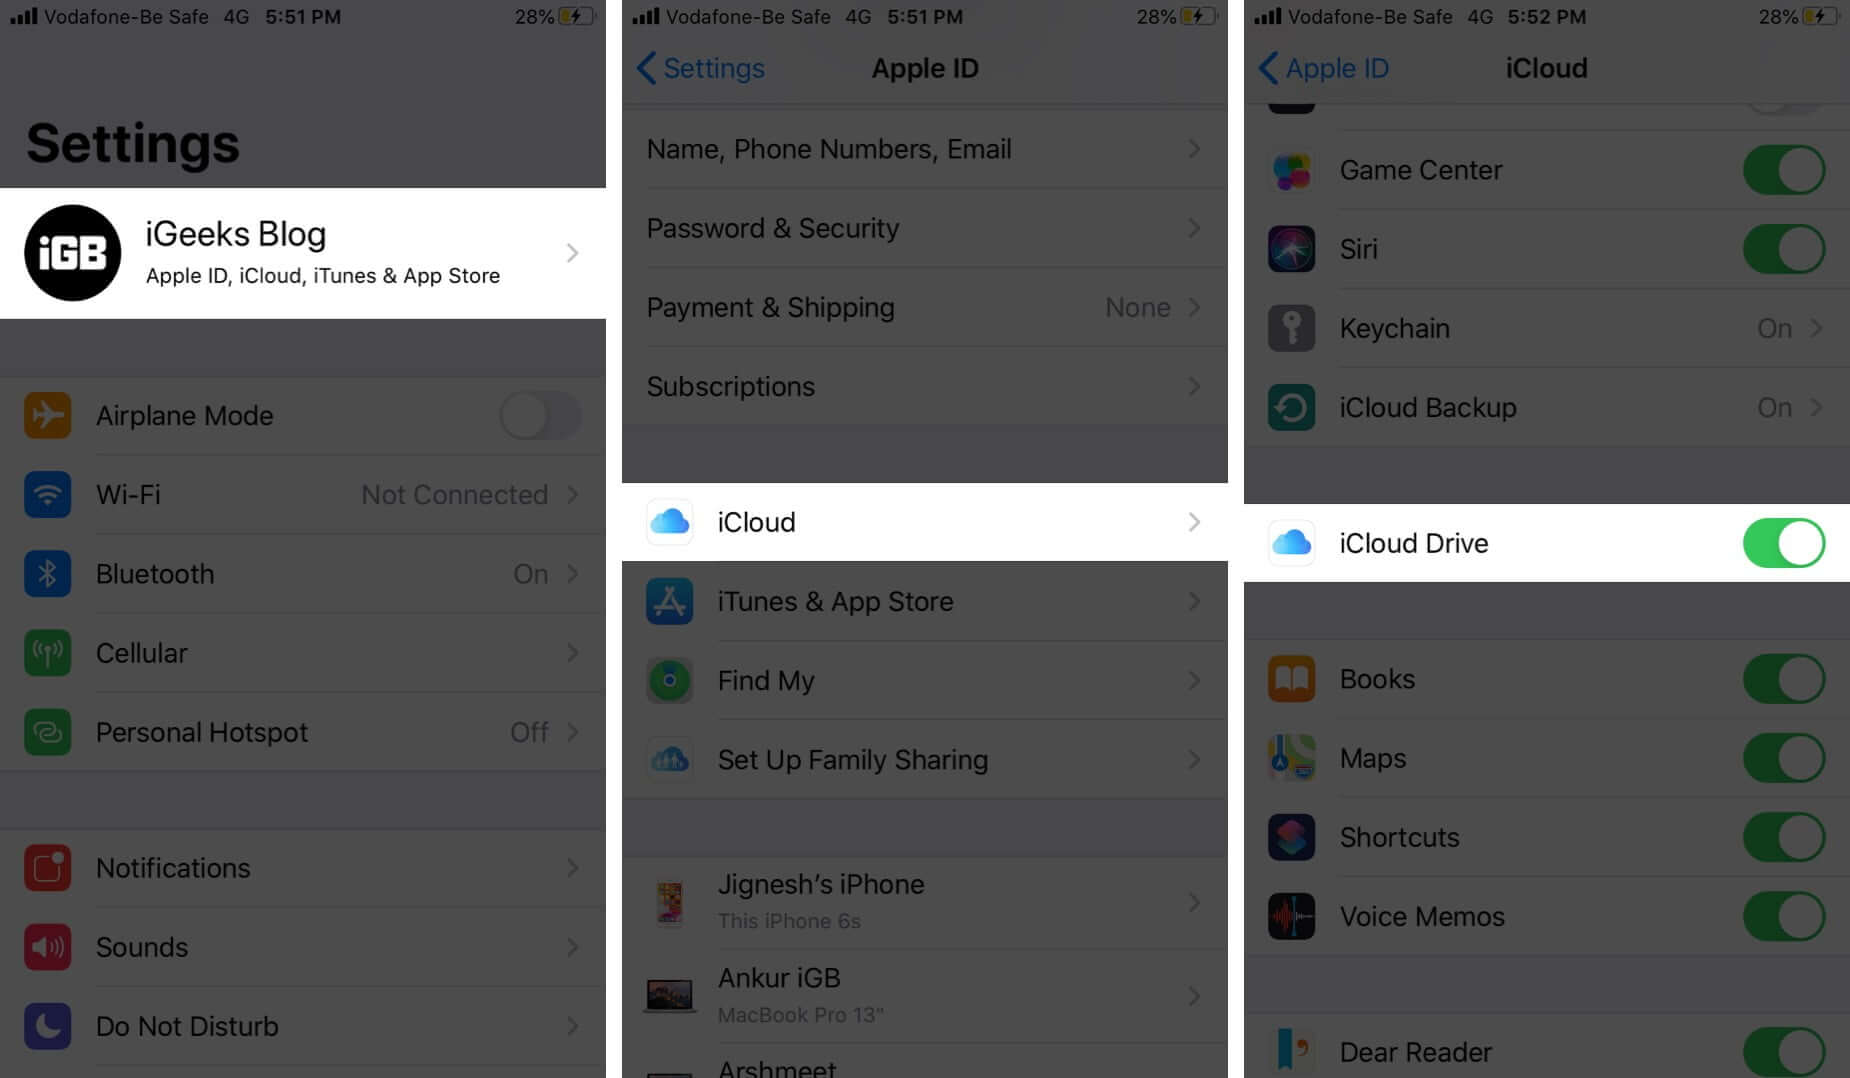 Make Sure iCloud Drive Sync with iPhone